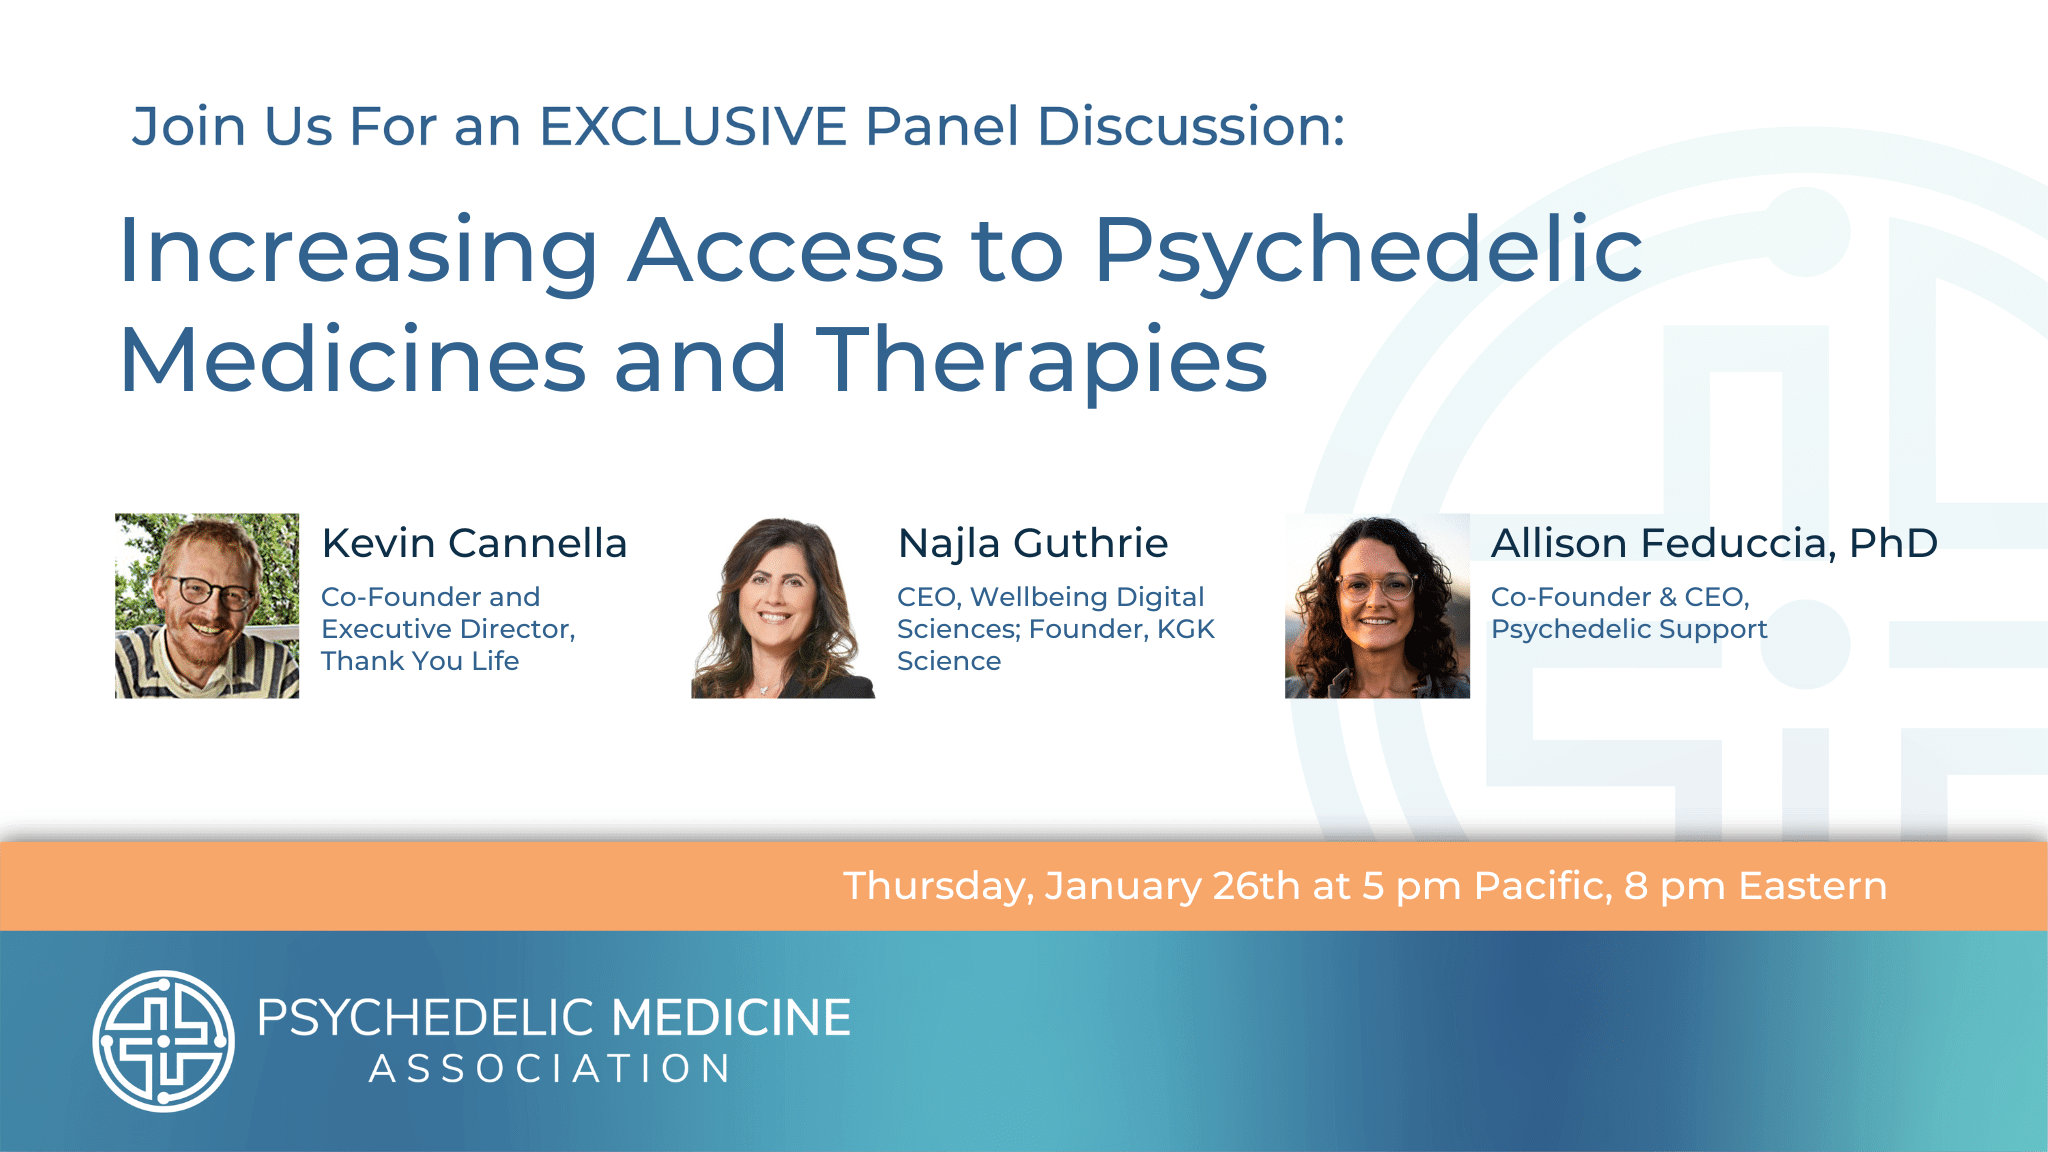 Increasing Access to Psychedelic Medicines and Therapies Webinar